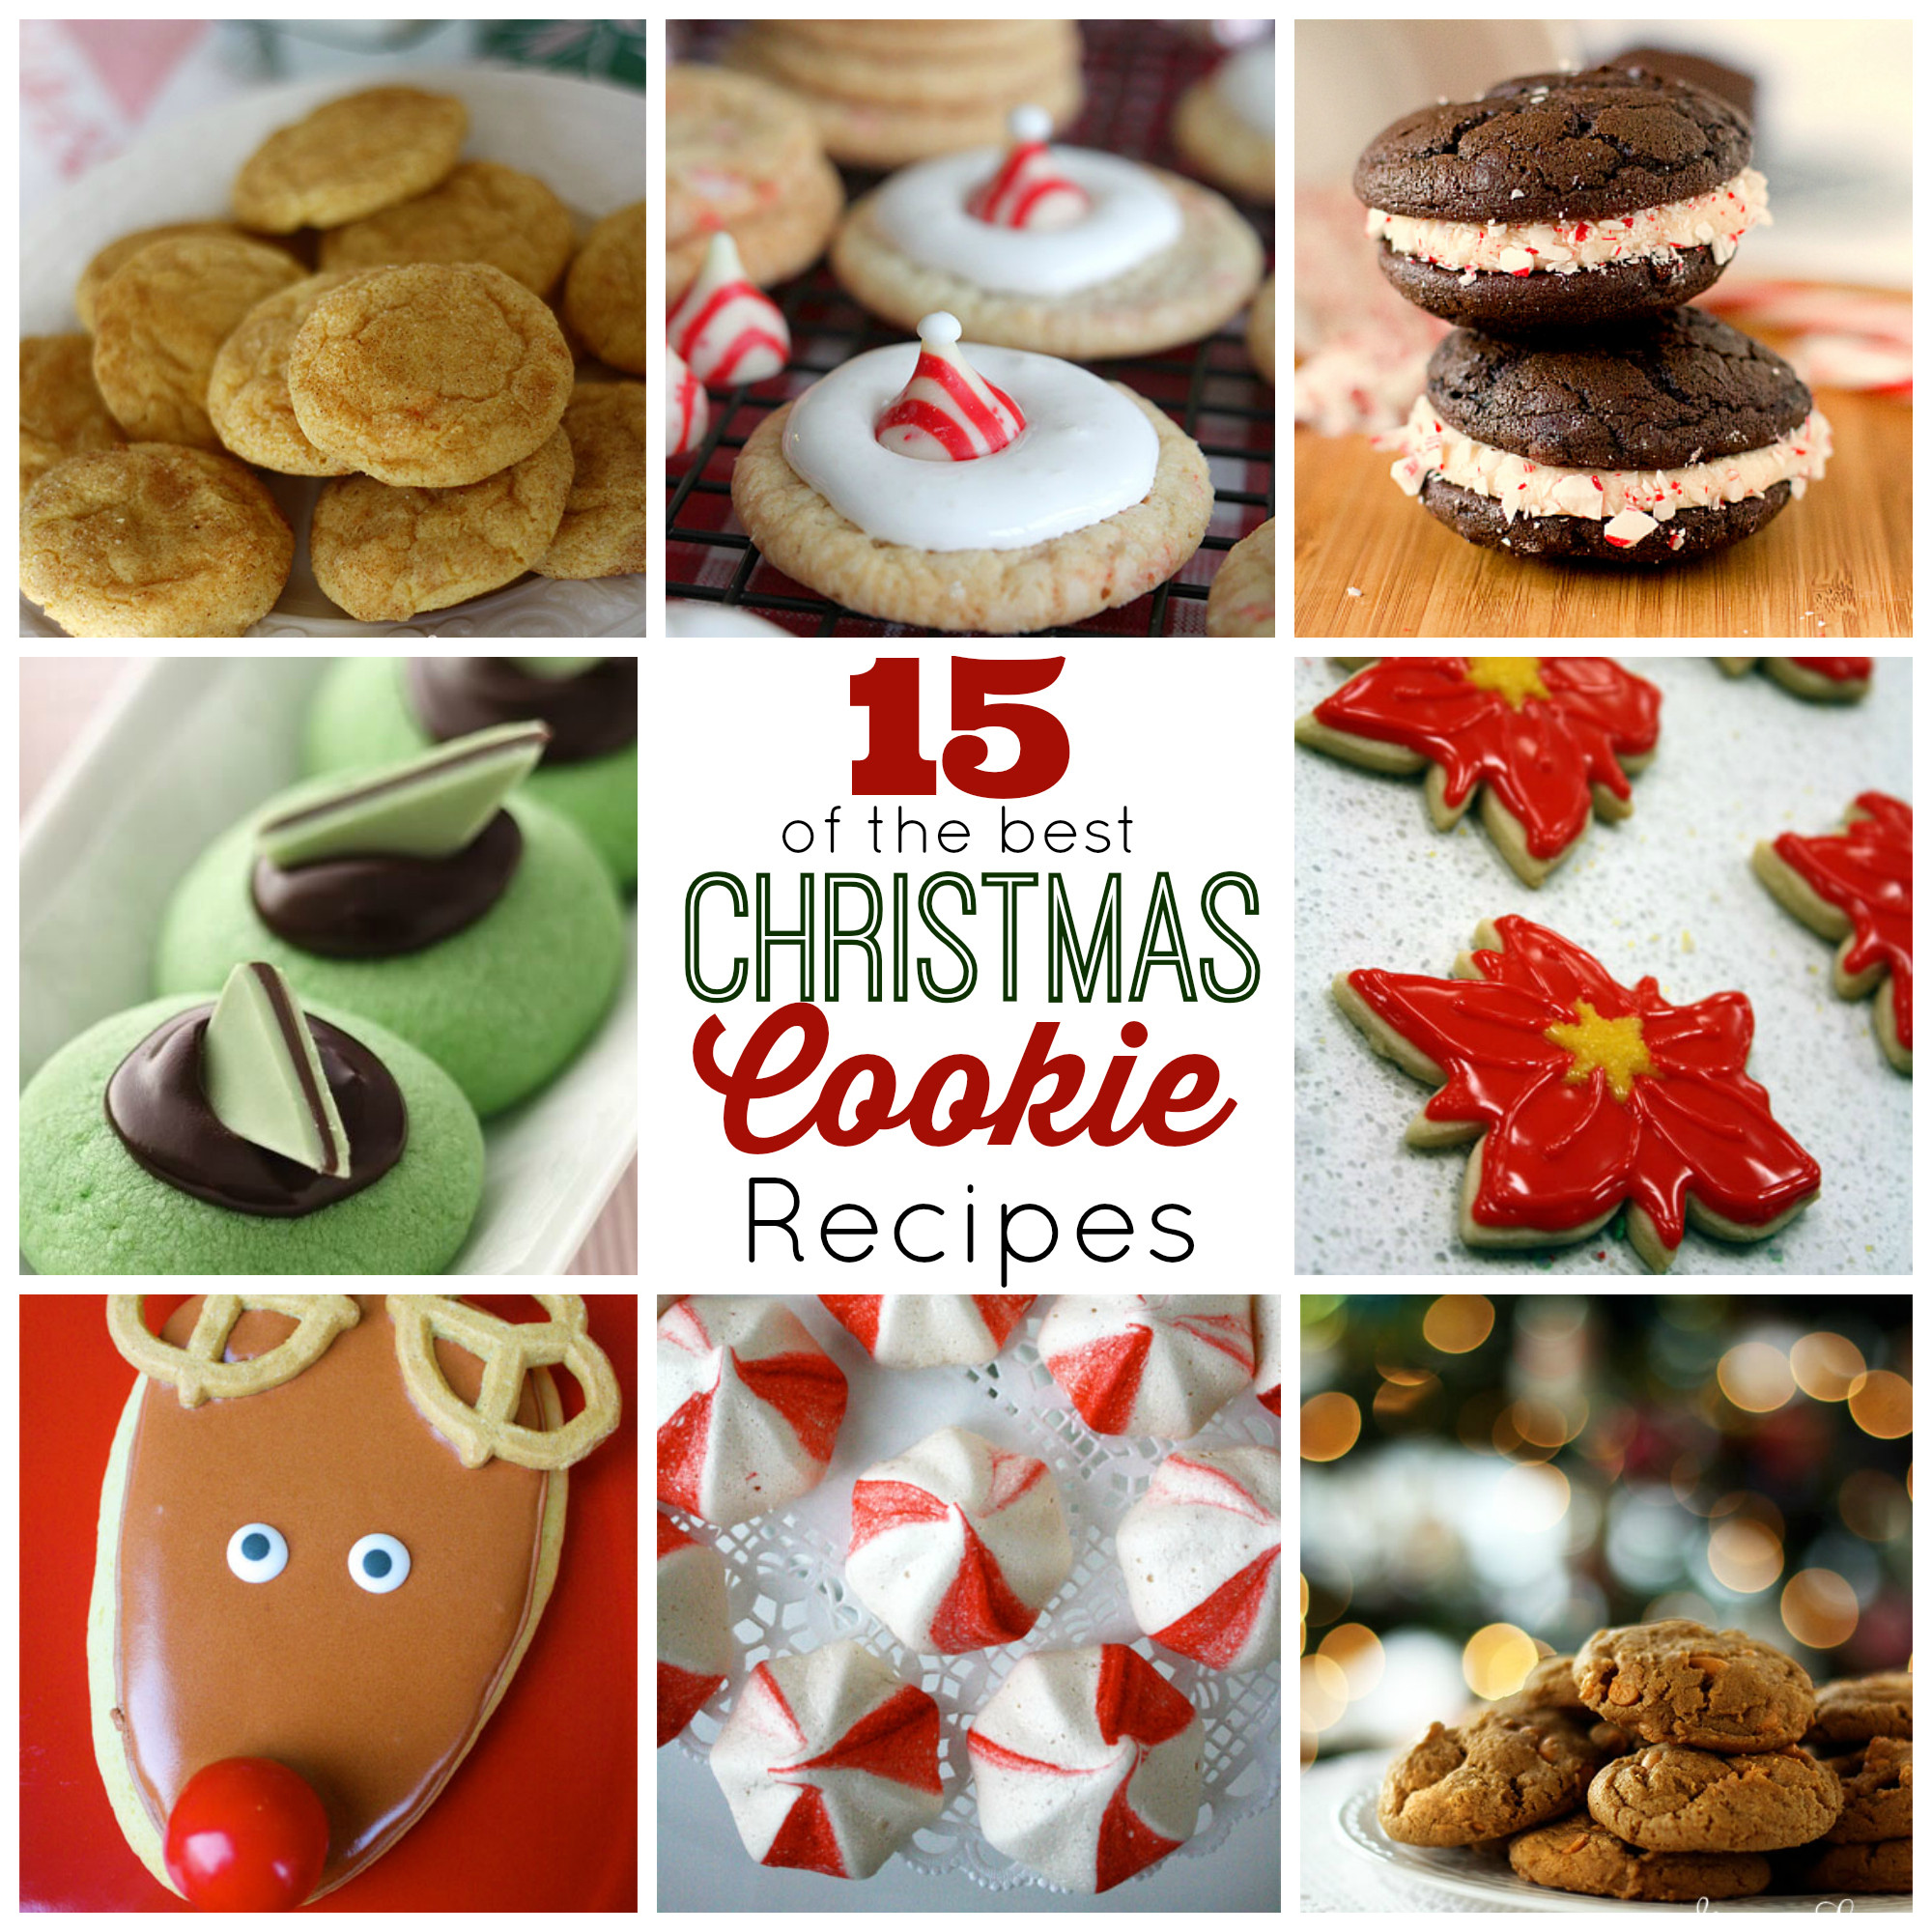 Holiday Baking Ideas Christmas
 15 of the Best Christmas Cookies